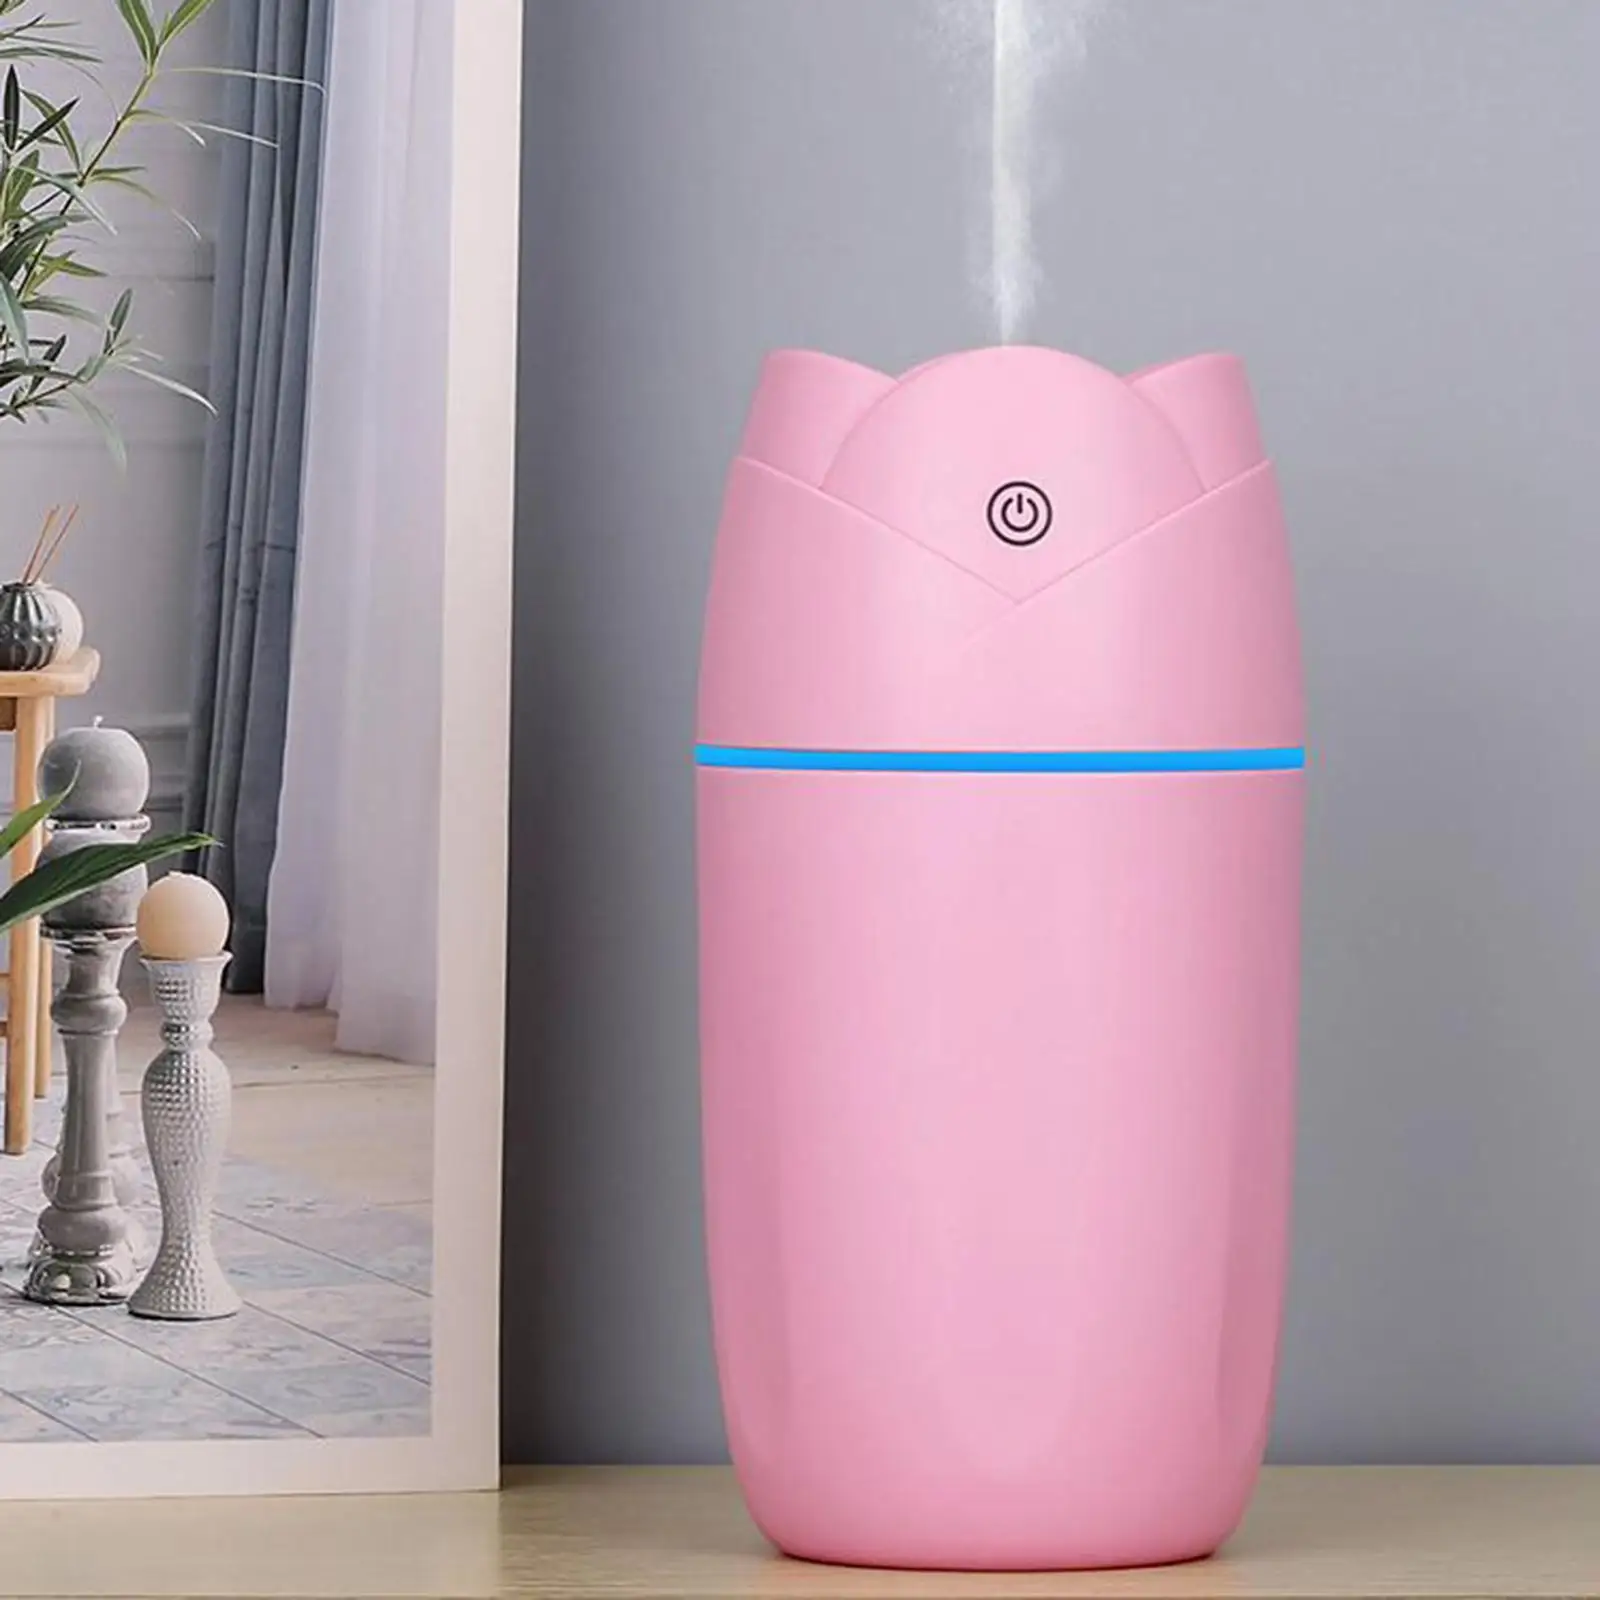 Portable Cool Mist Humidifier Silent Smart with 7 Color LED Night Light Mist Maker Diffuser Aroma Diffuser for Kids Room Bedroom